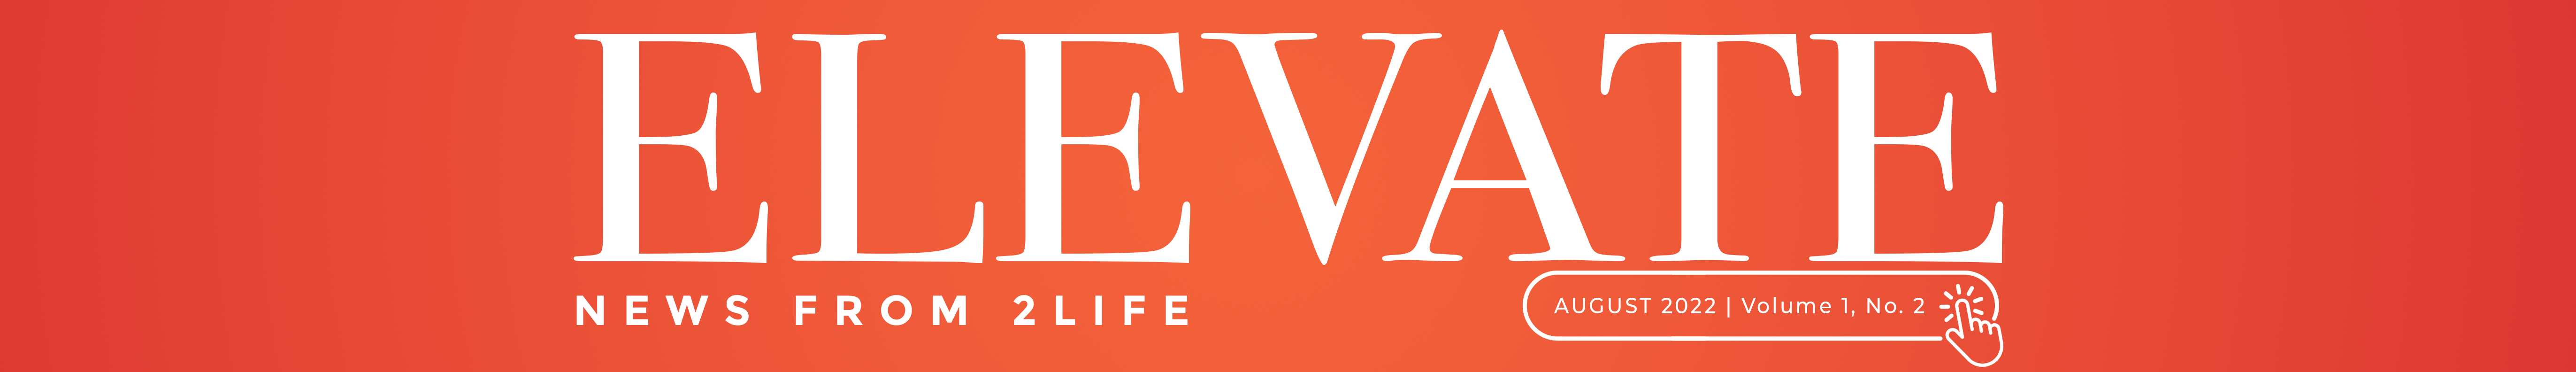 Elevate | News From 2Life